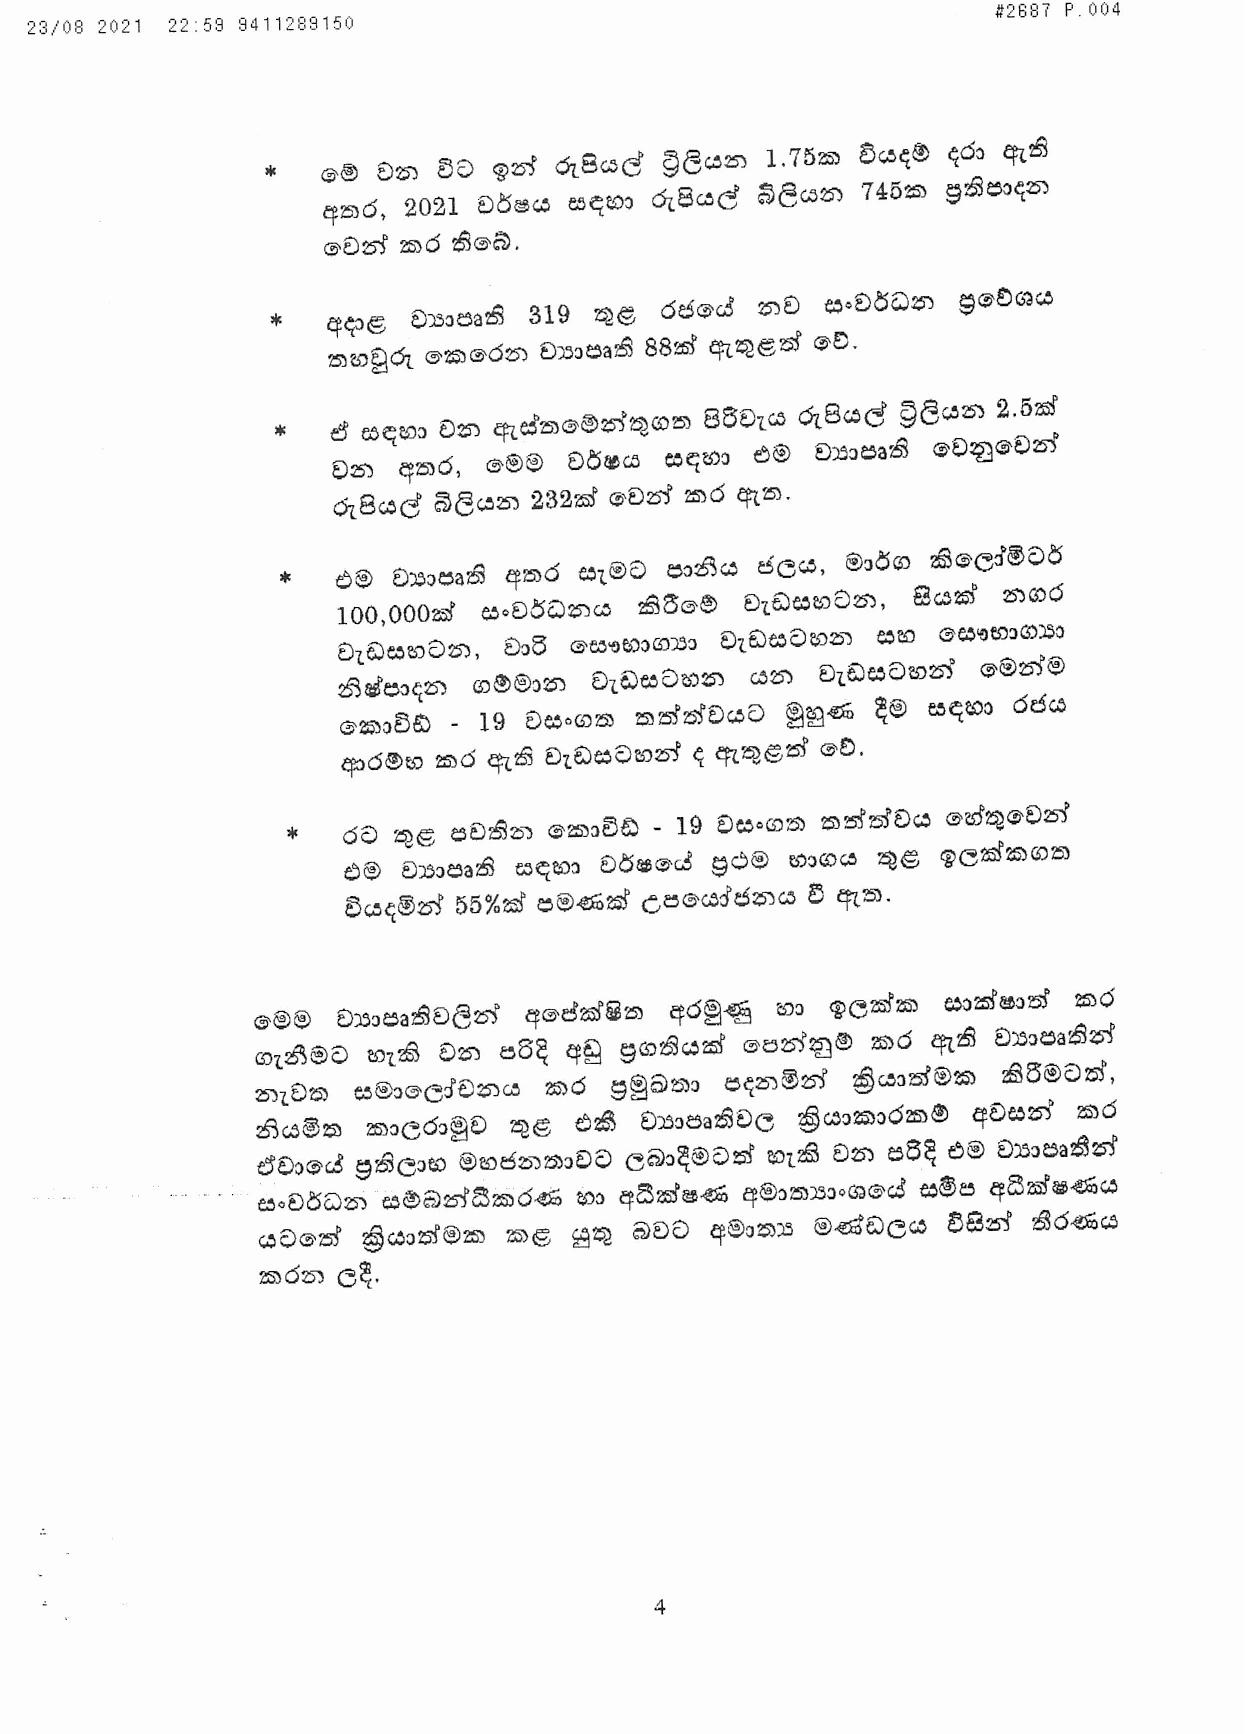 Cabinet Decision on 23.08.2021 page 004